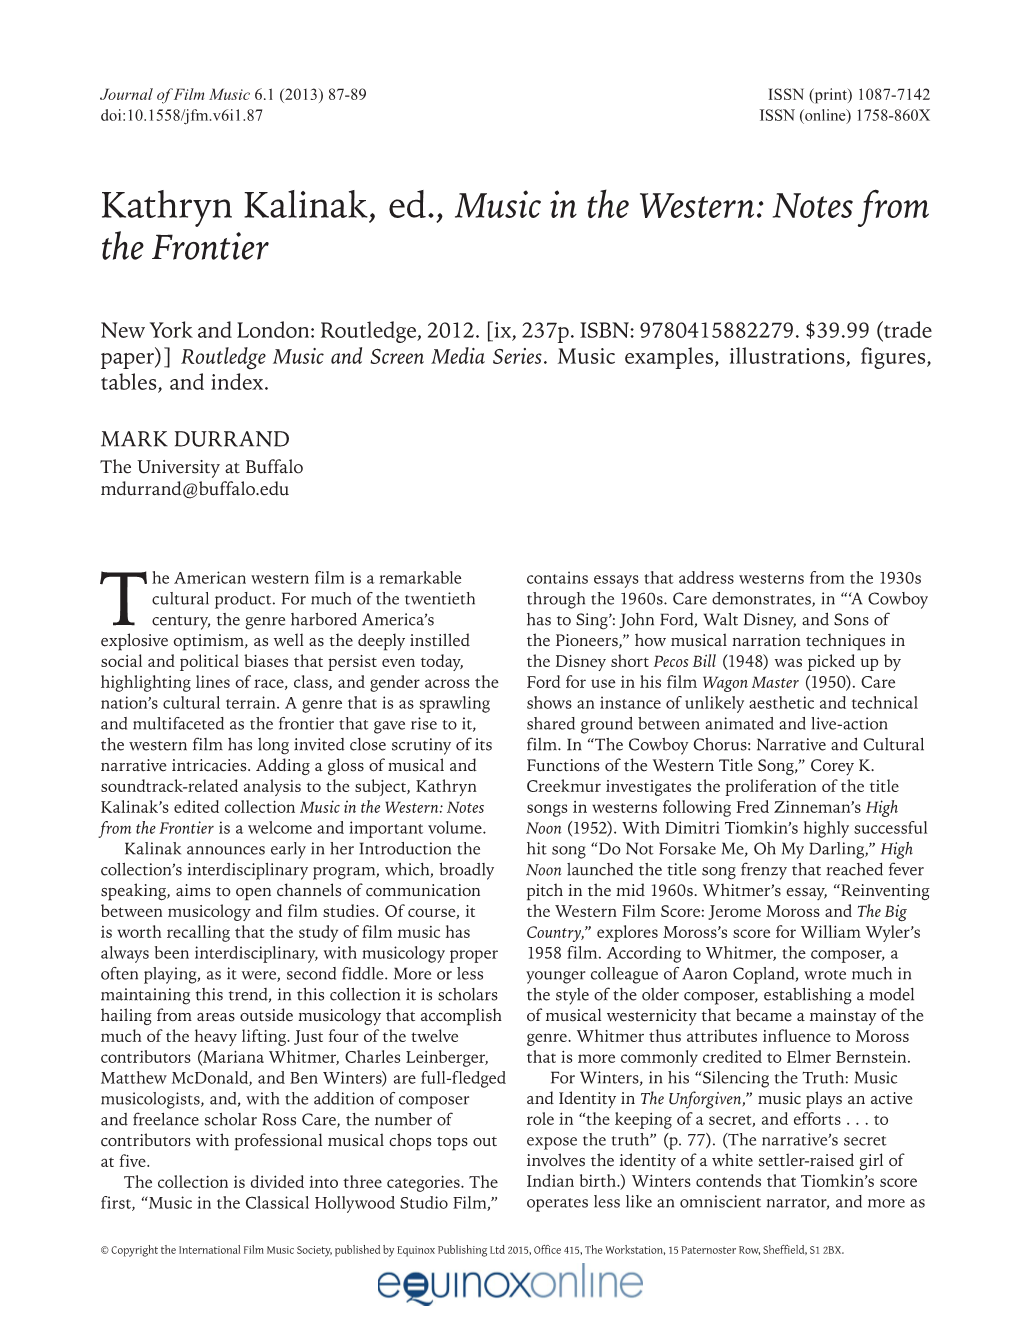 Kathryn Kalinak, Ed., Music in the Western: Notes from the Frontier